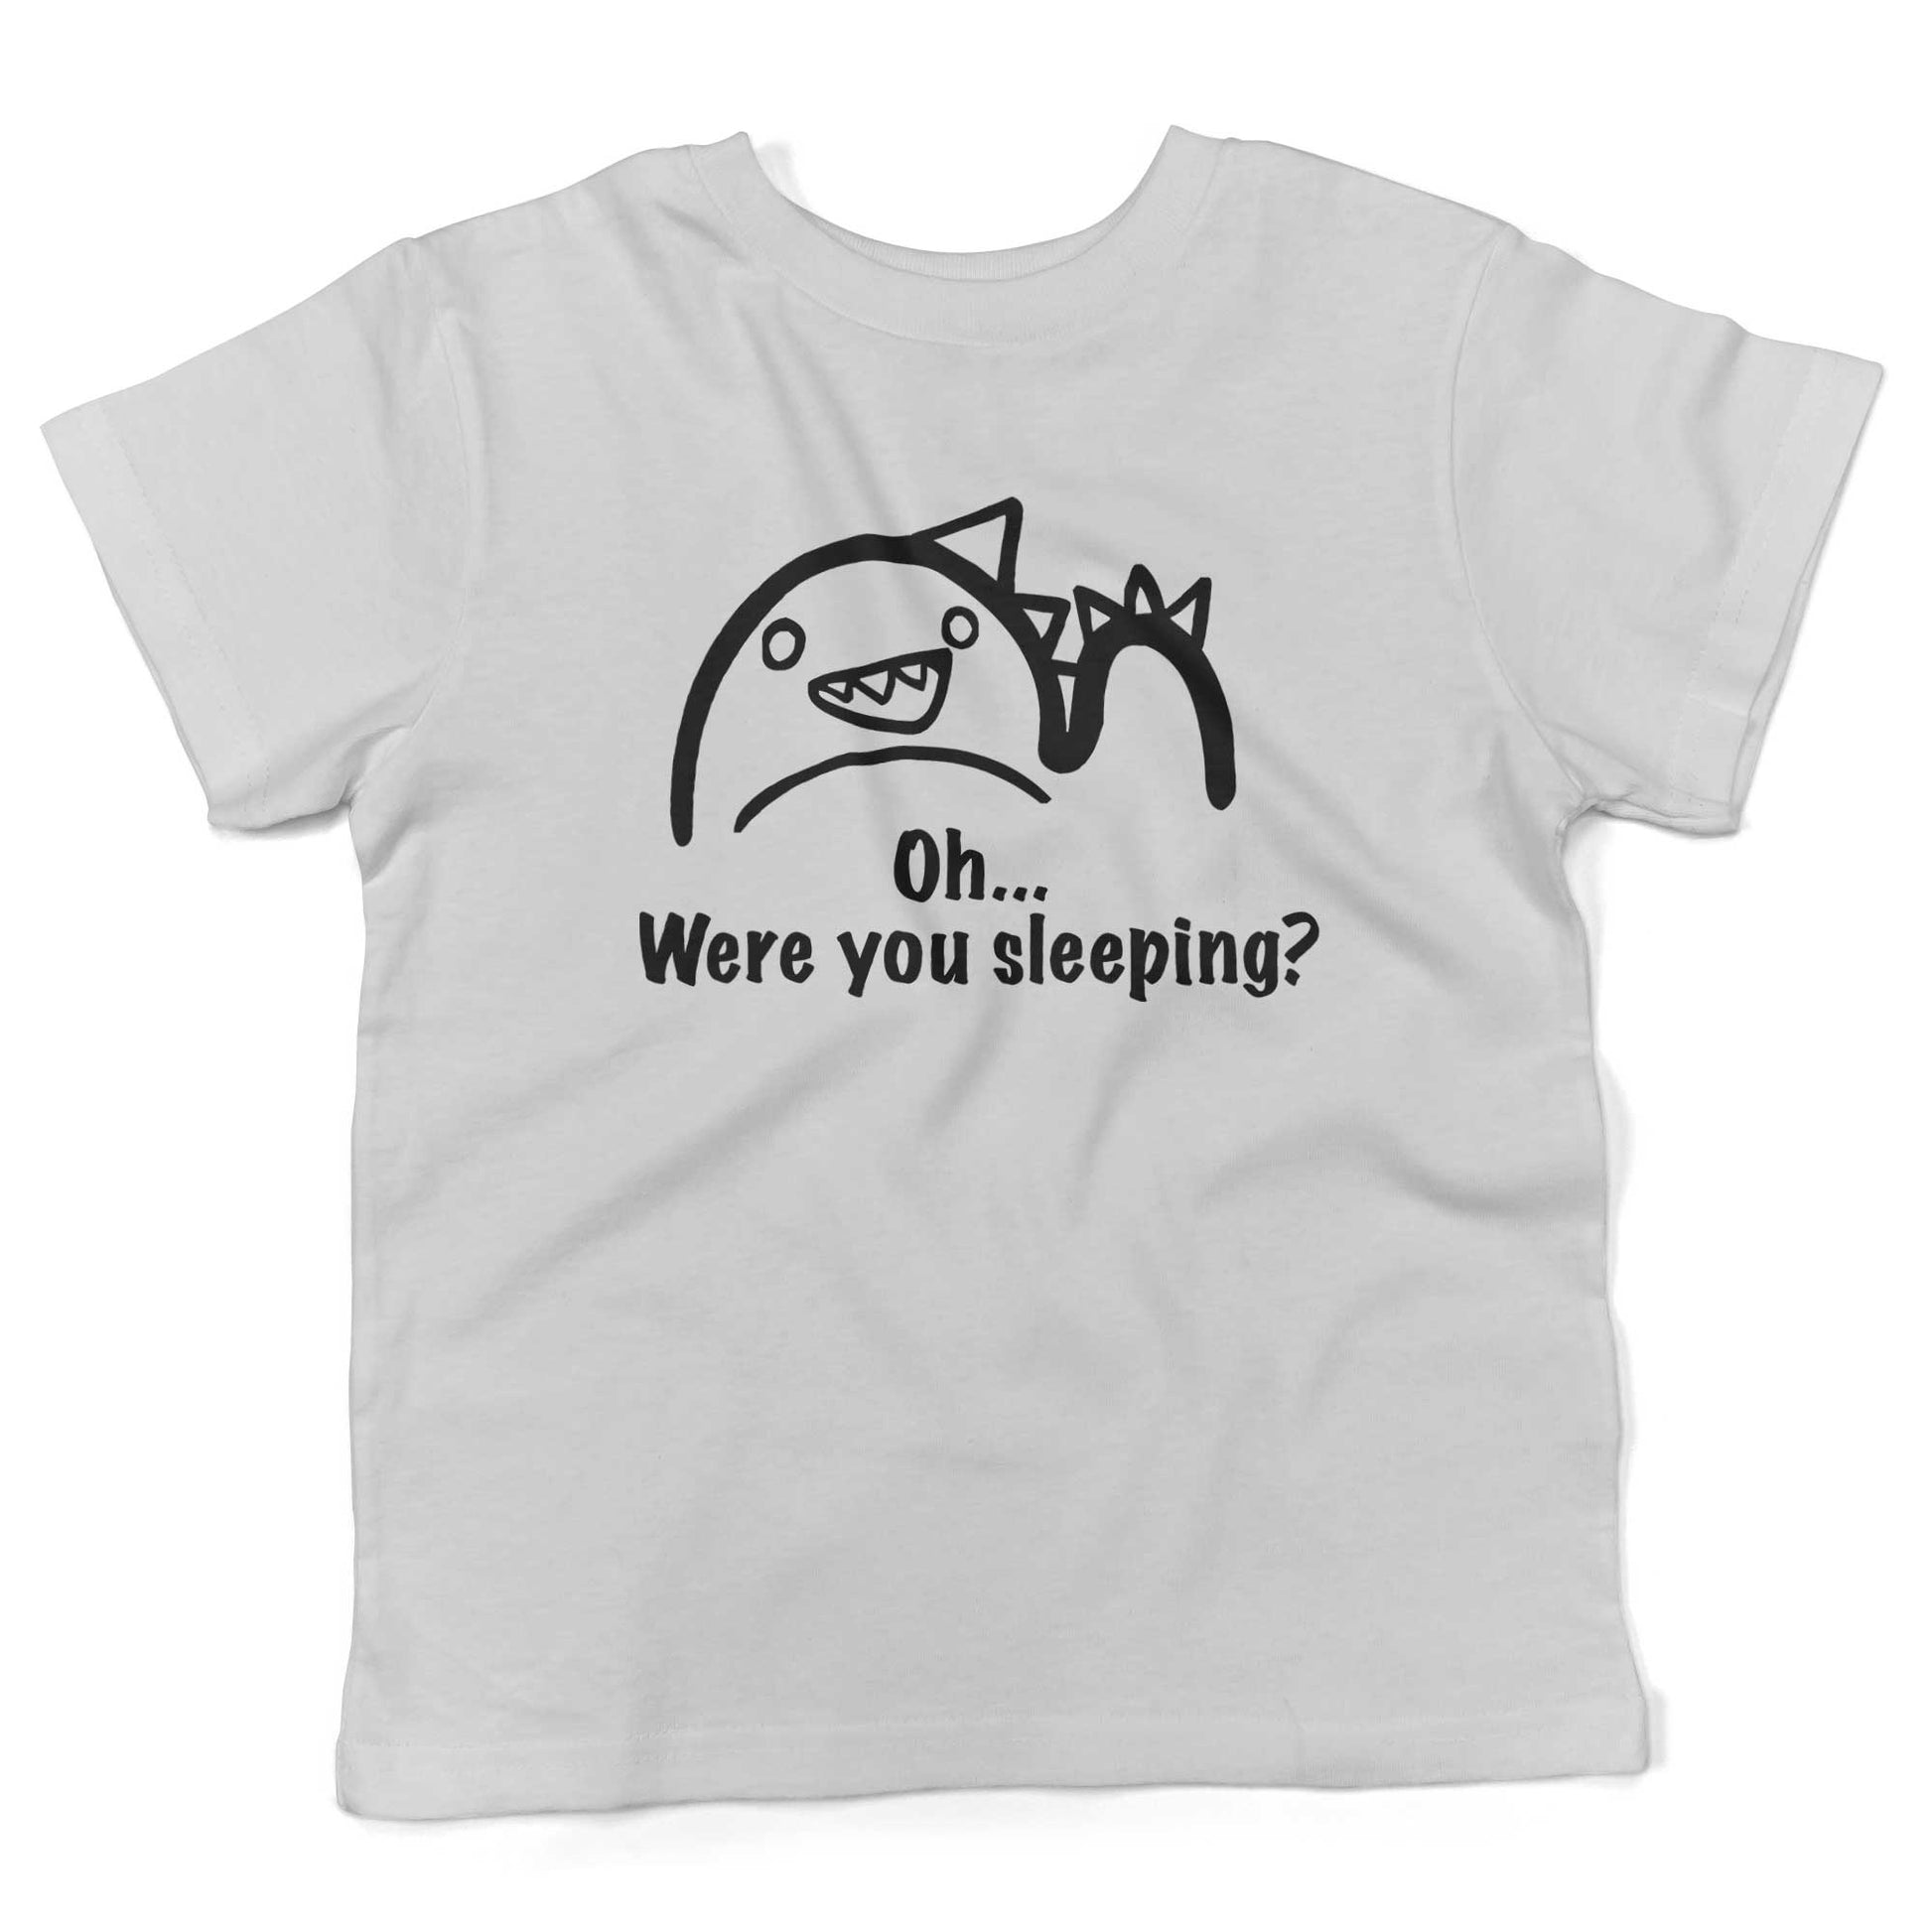 Oh...Were you sleeping? Toddler Shirt-White-2T